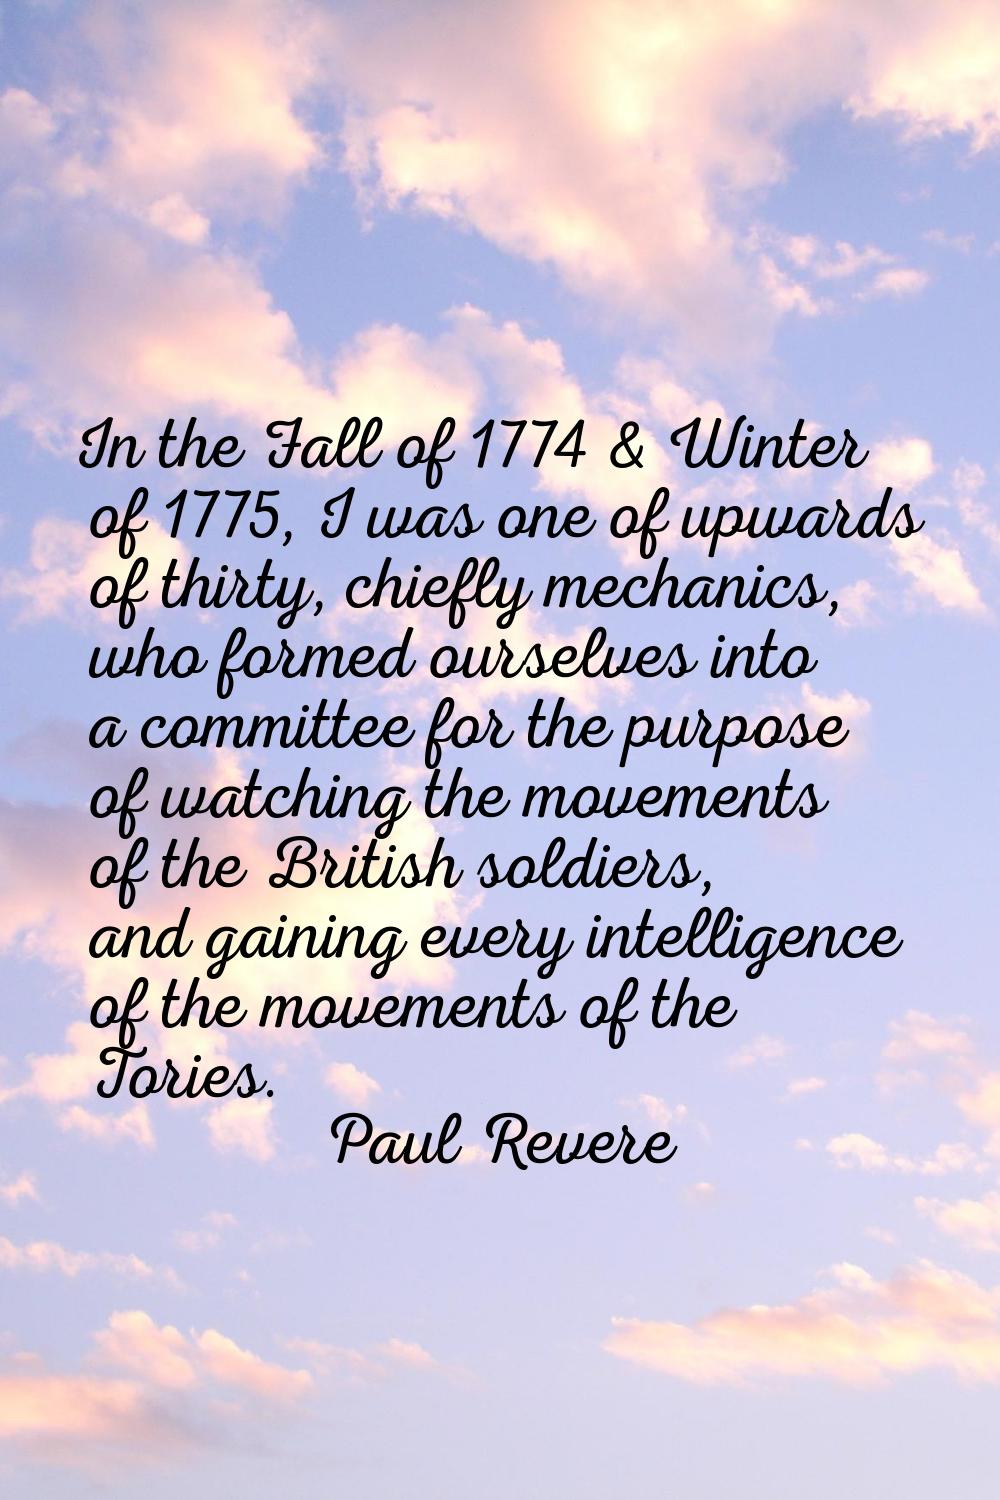 In the Fall of 1774 & Winter of 1775, I was one of upwards of thirty, chiefly mechanics, who formed